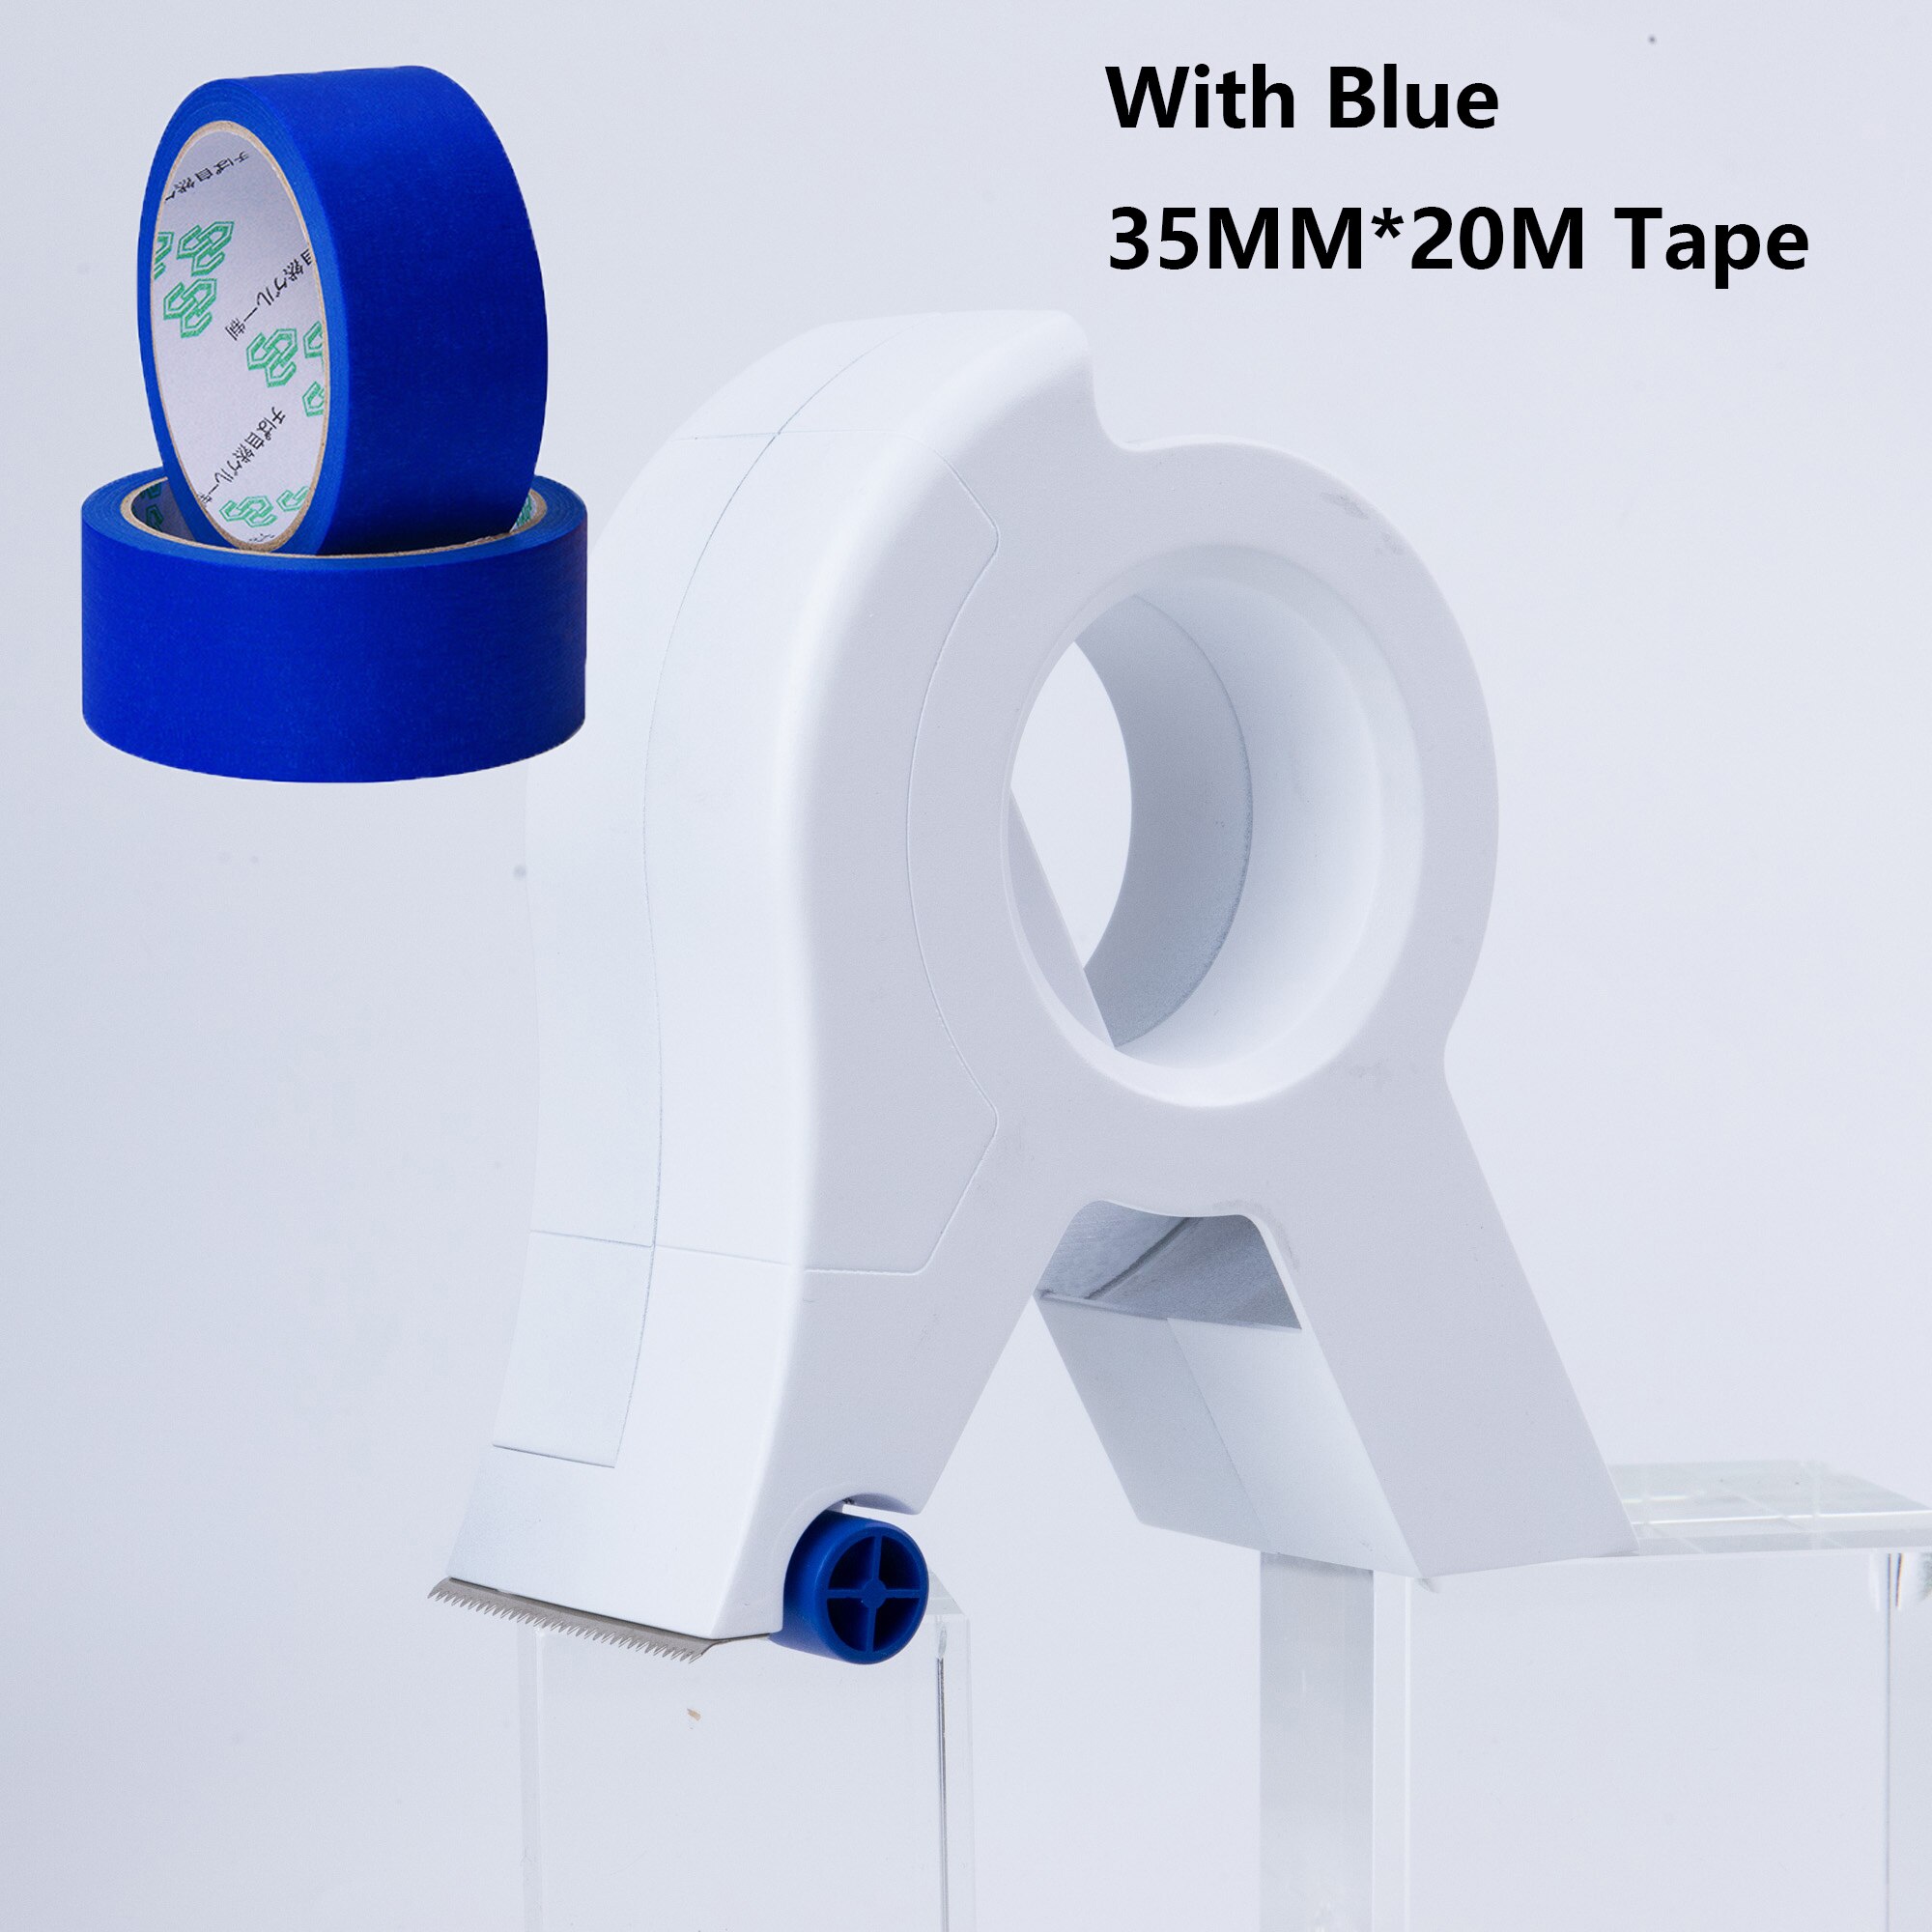 Painter Masking Tape Applicator Dispenser Machine Wall Floor Painting Packaging Sealing Pack Tape Tool Fit Tape 50mm Wide Max.: With A Blue Tape